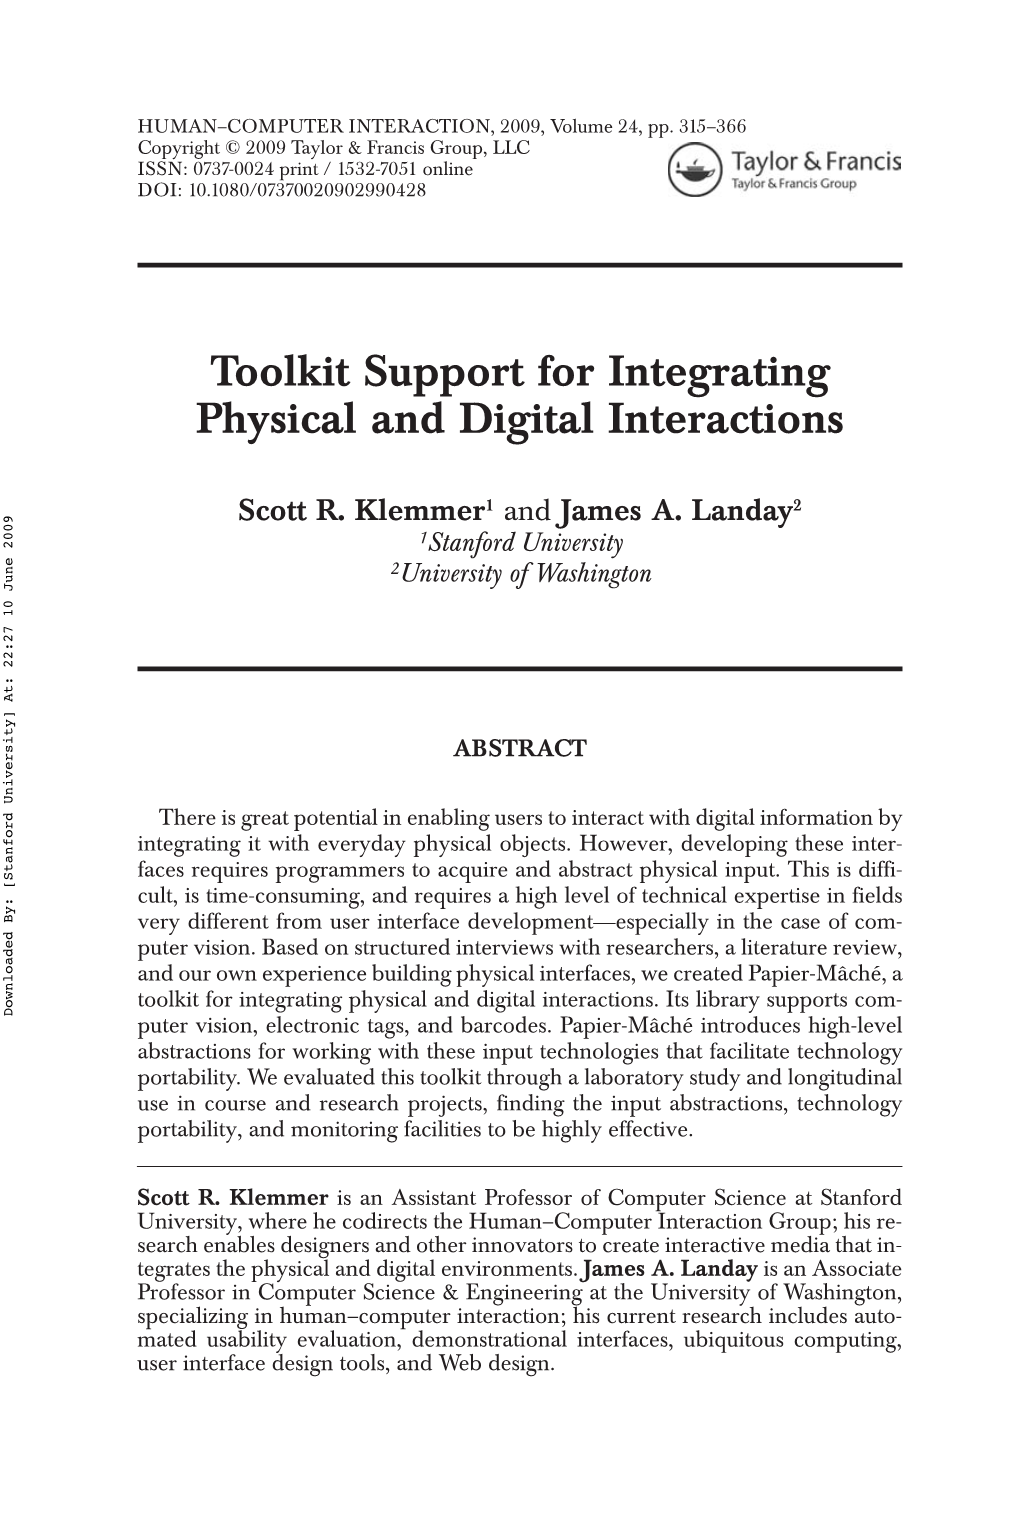 Toolkit Support for Integrating Physical and Digital Interactions